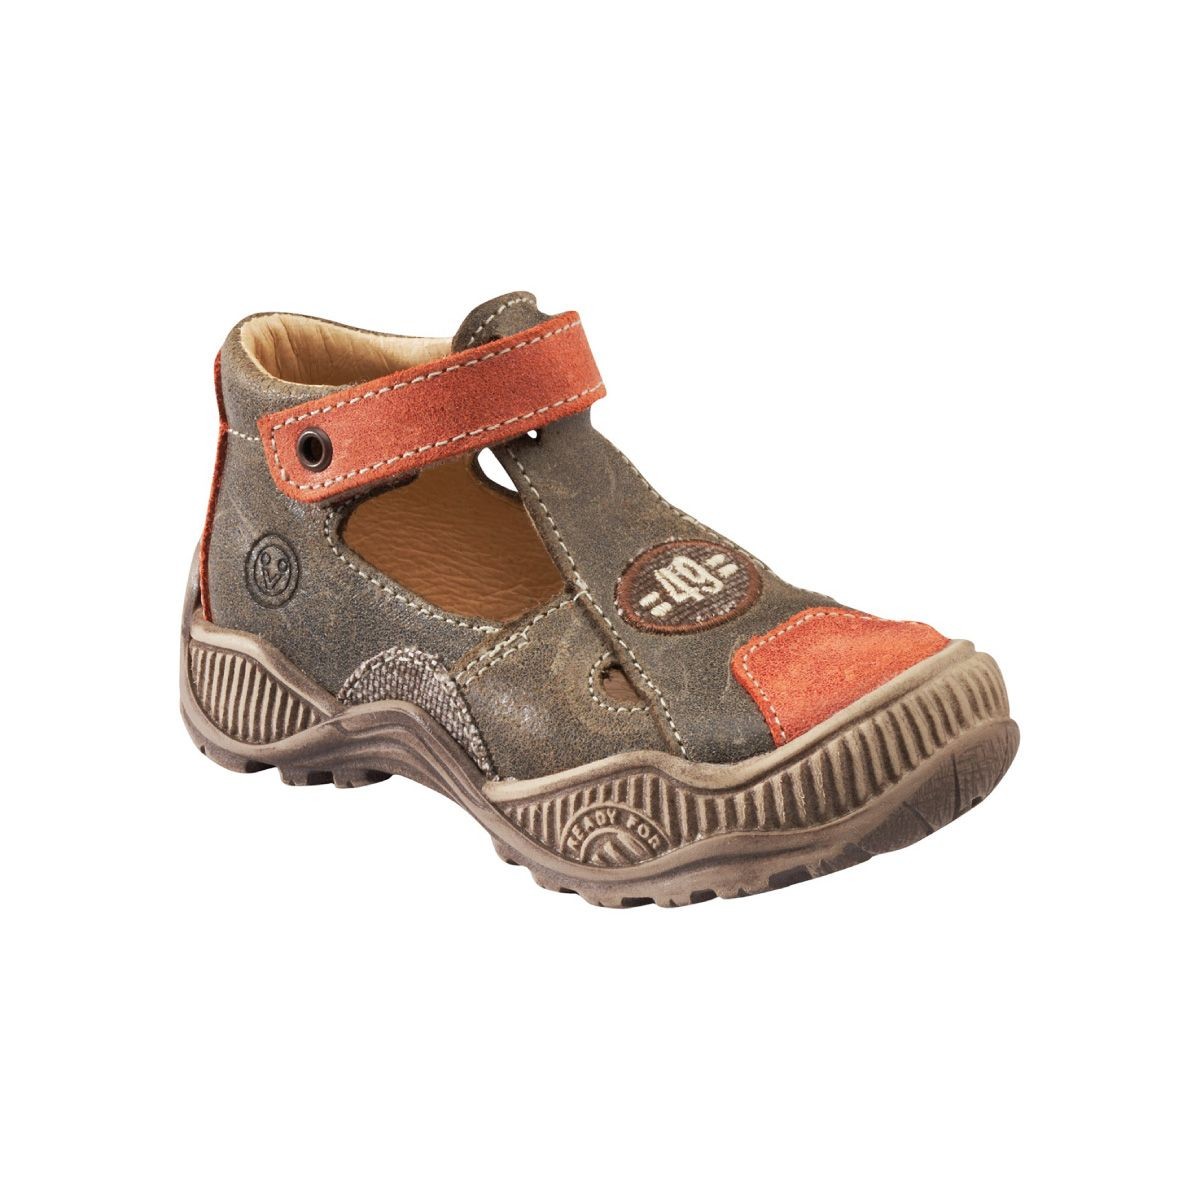 Infant and child Sandals